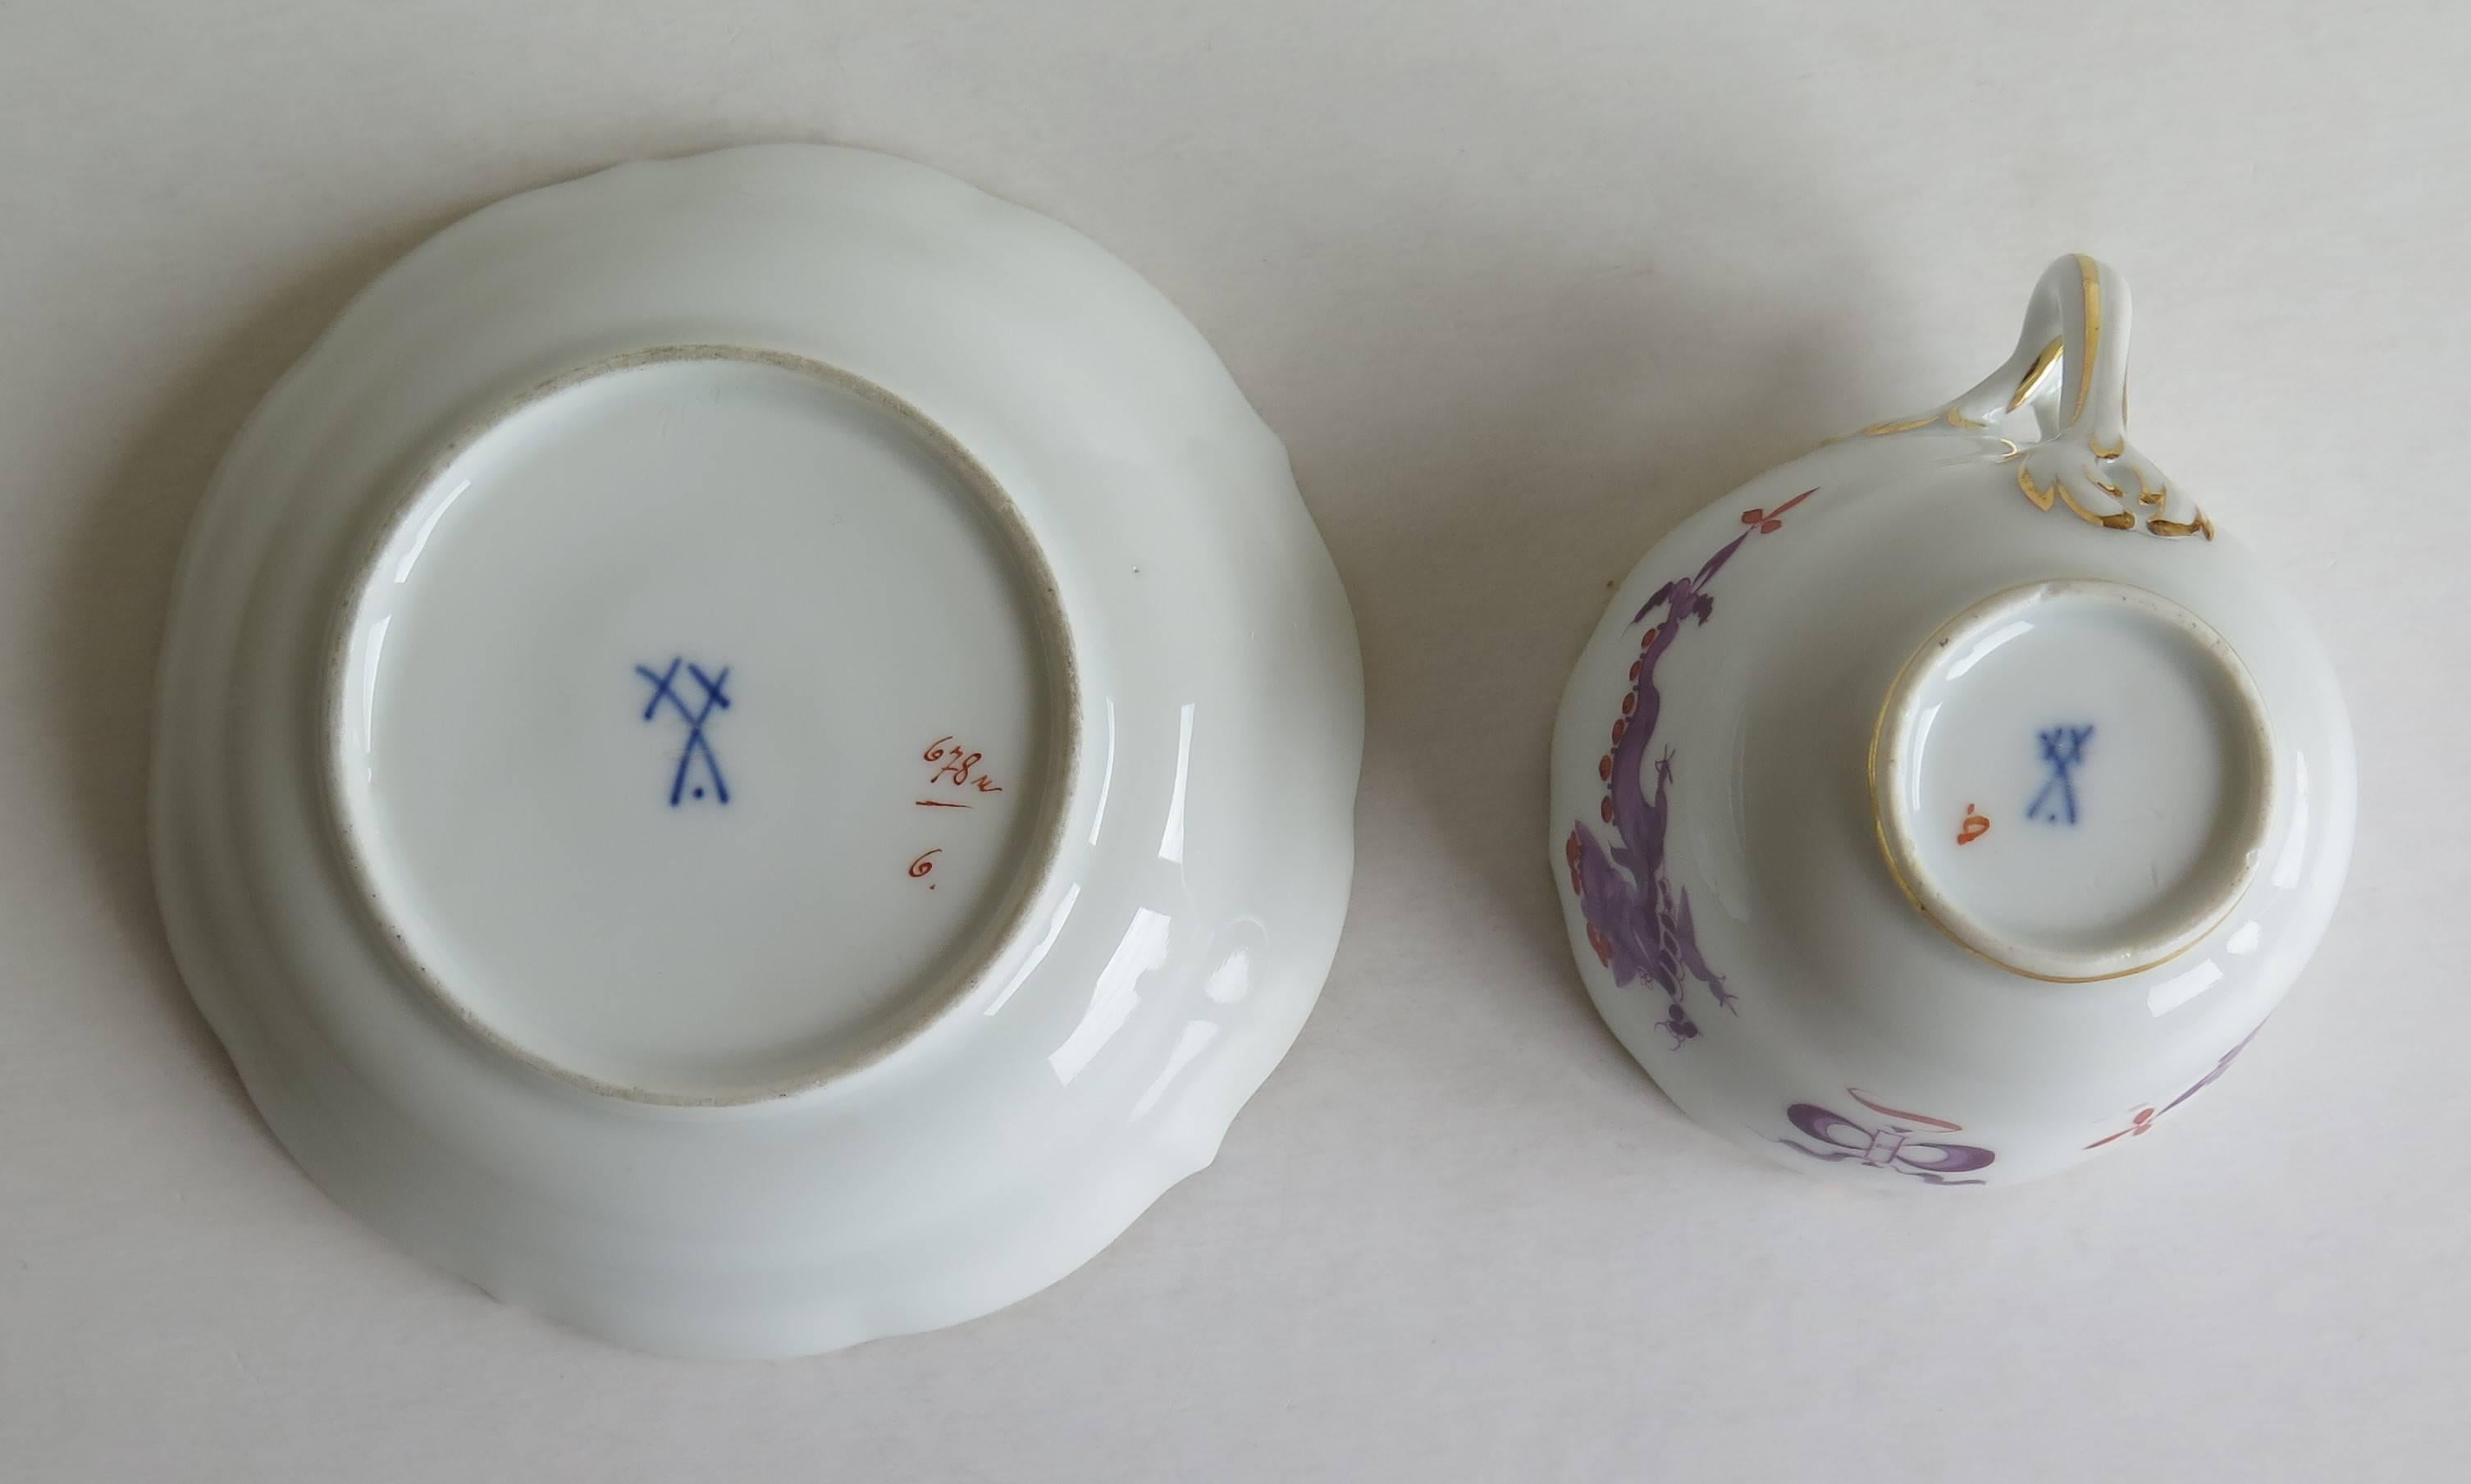 20th Century Meissen Porcelain Demitasse Cup and Saucer Chinese Dragon Pattern, circa 1928